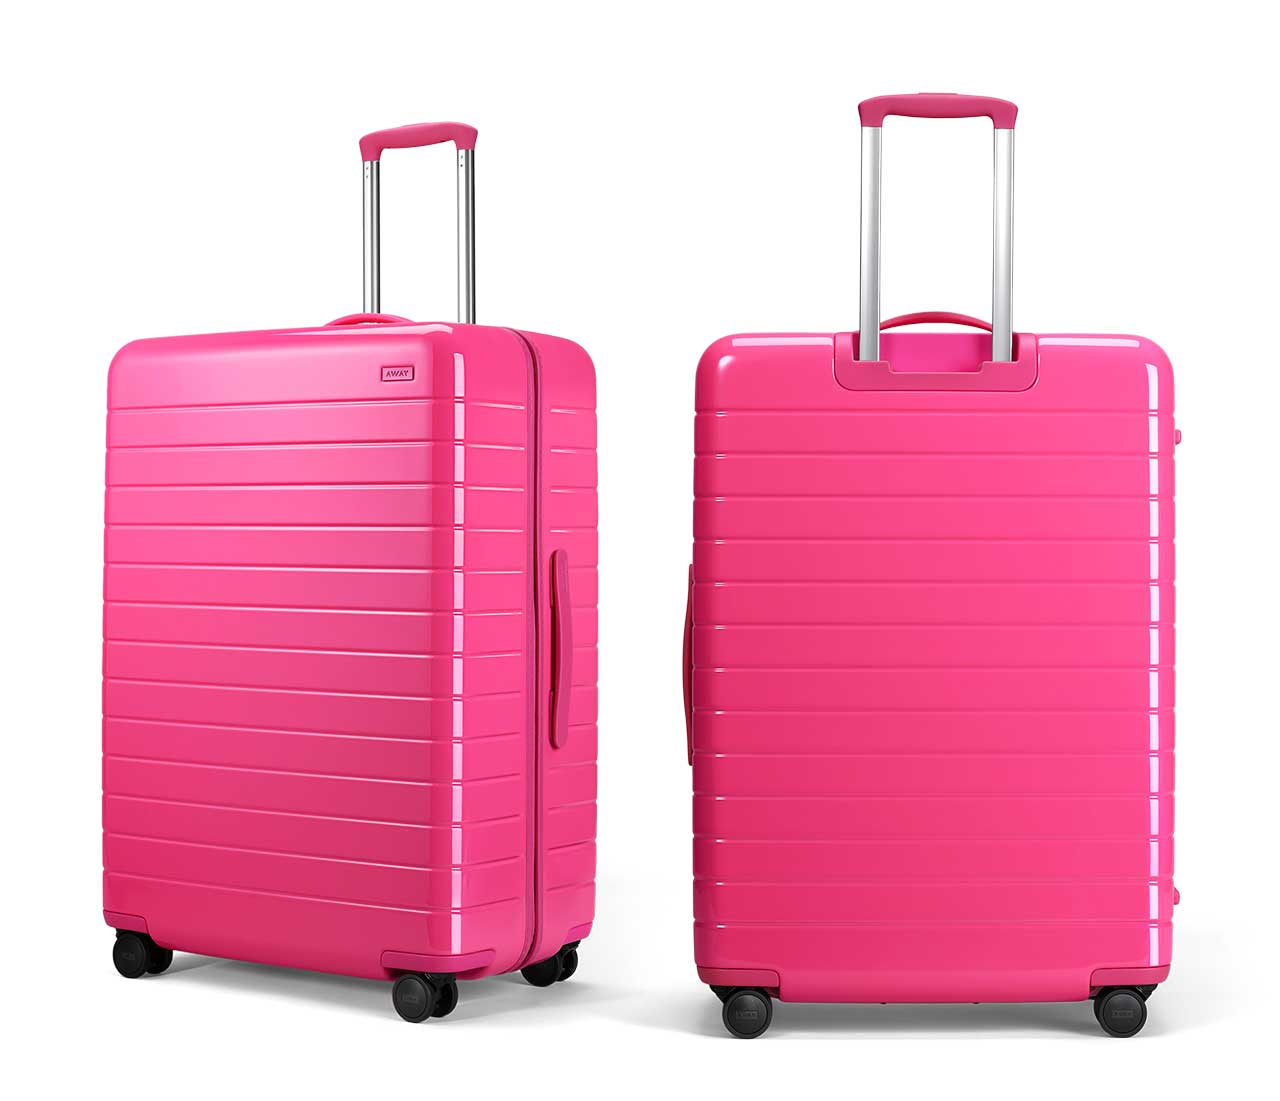 Away Launches Neon Luggage Collection - PureWow